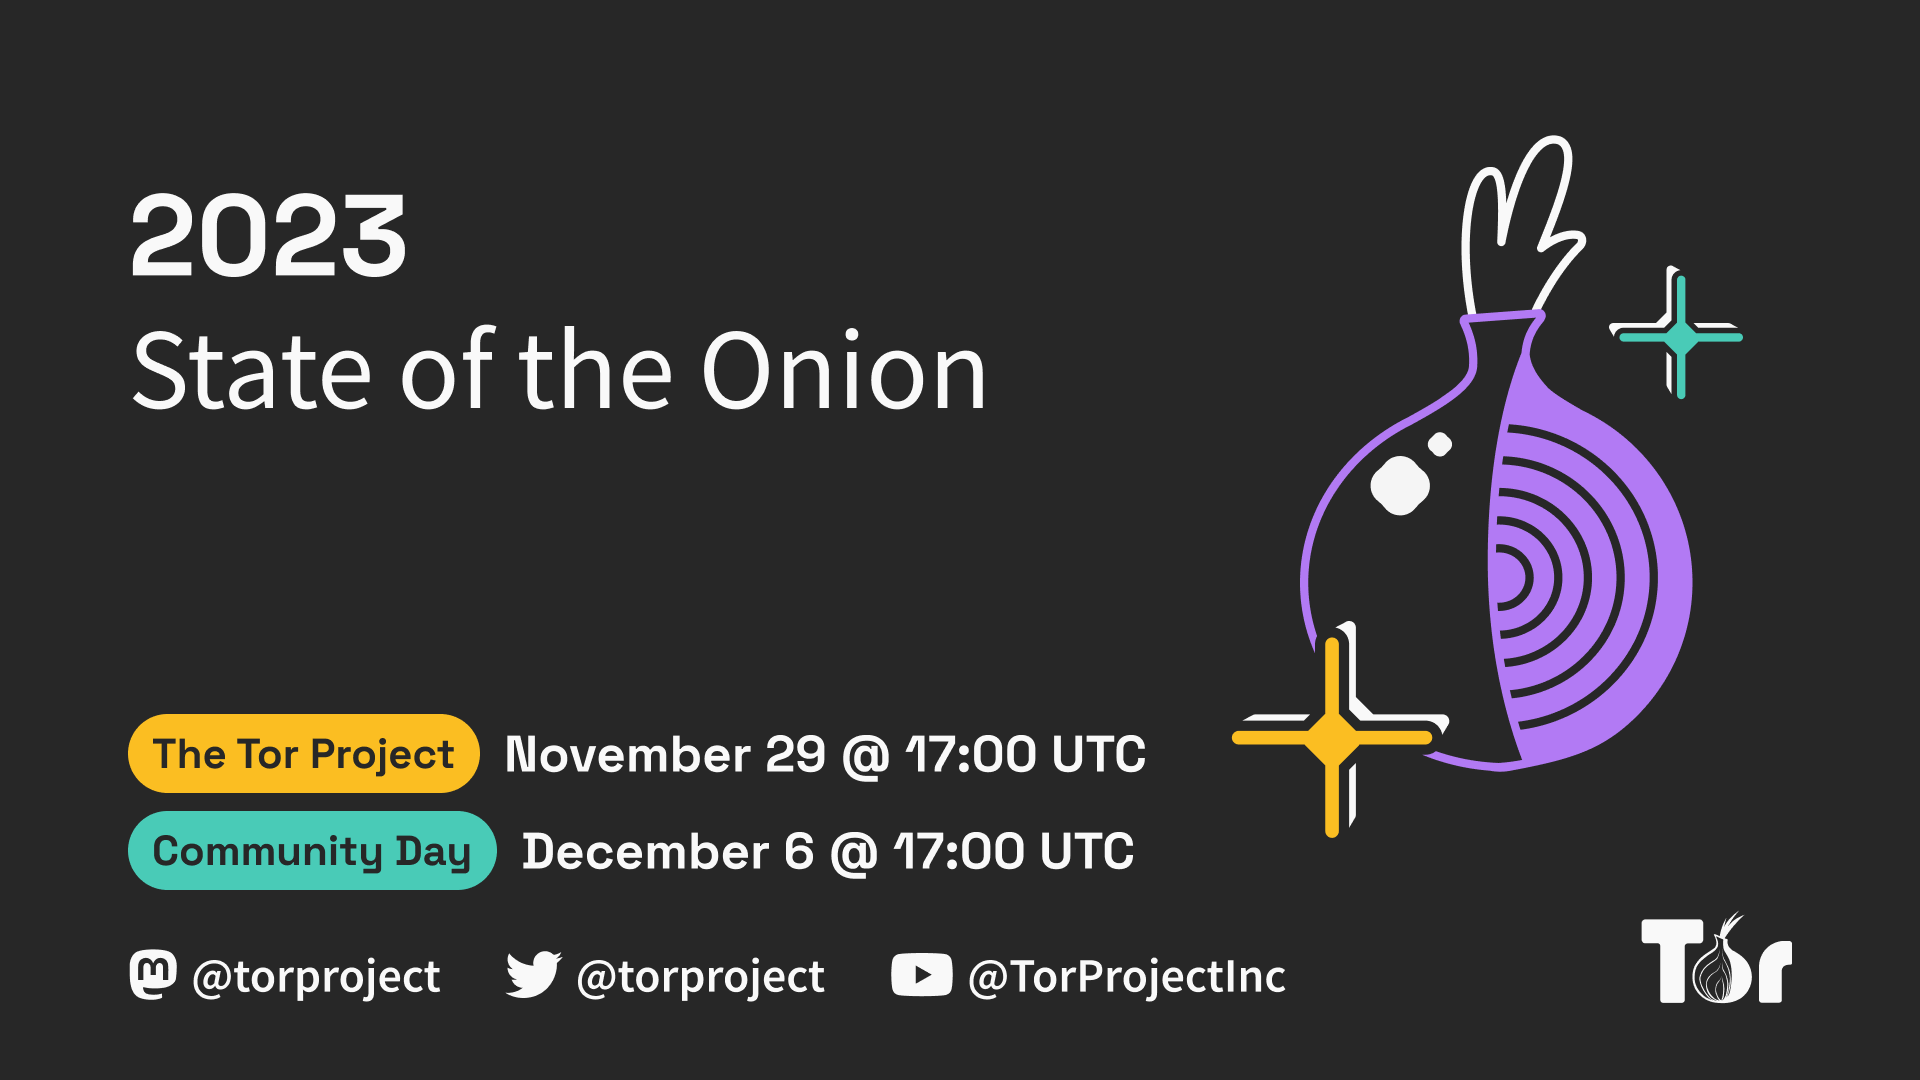 State of the onion keyvisual, stylized onion, on black background with the State of the Onion dates, Nov 29th and Dec 6th